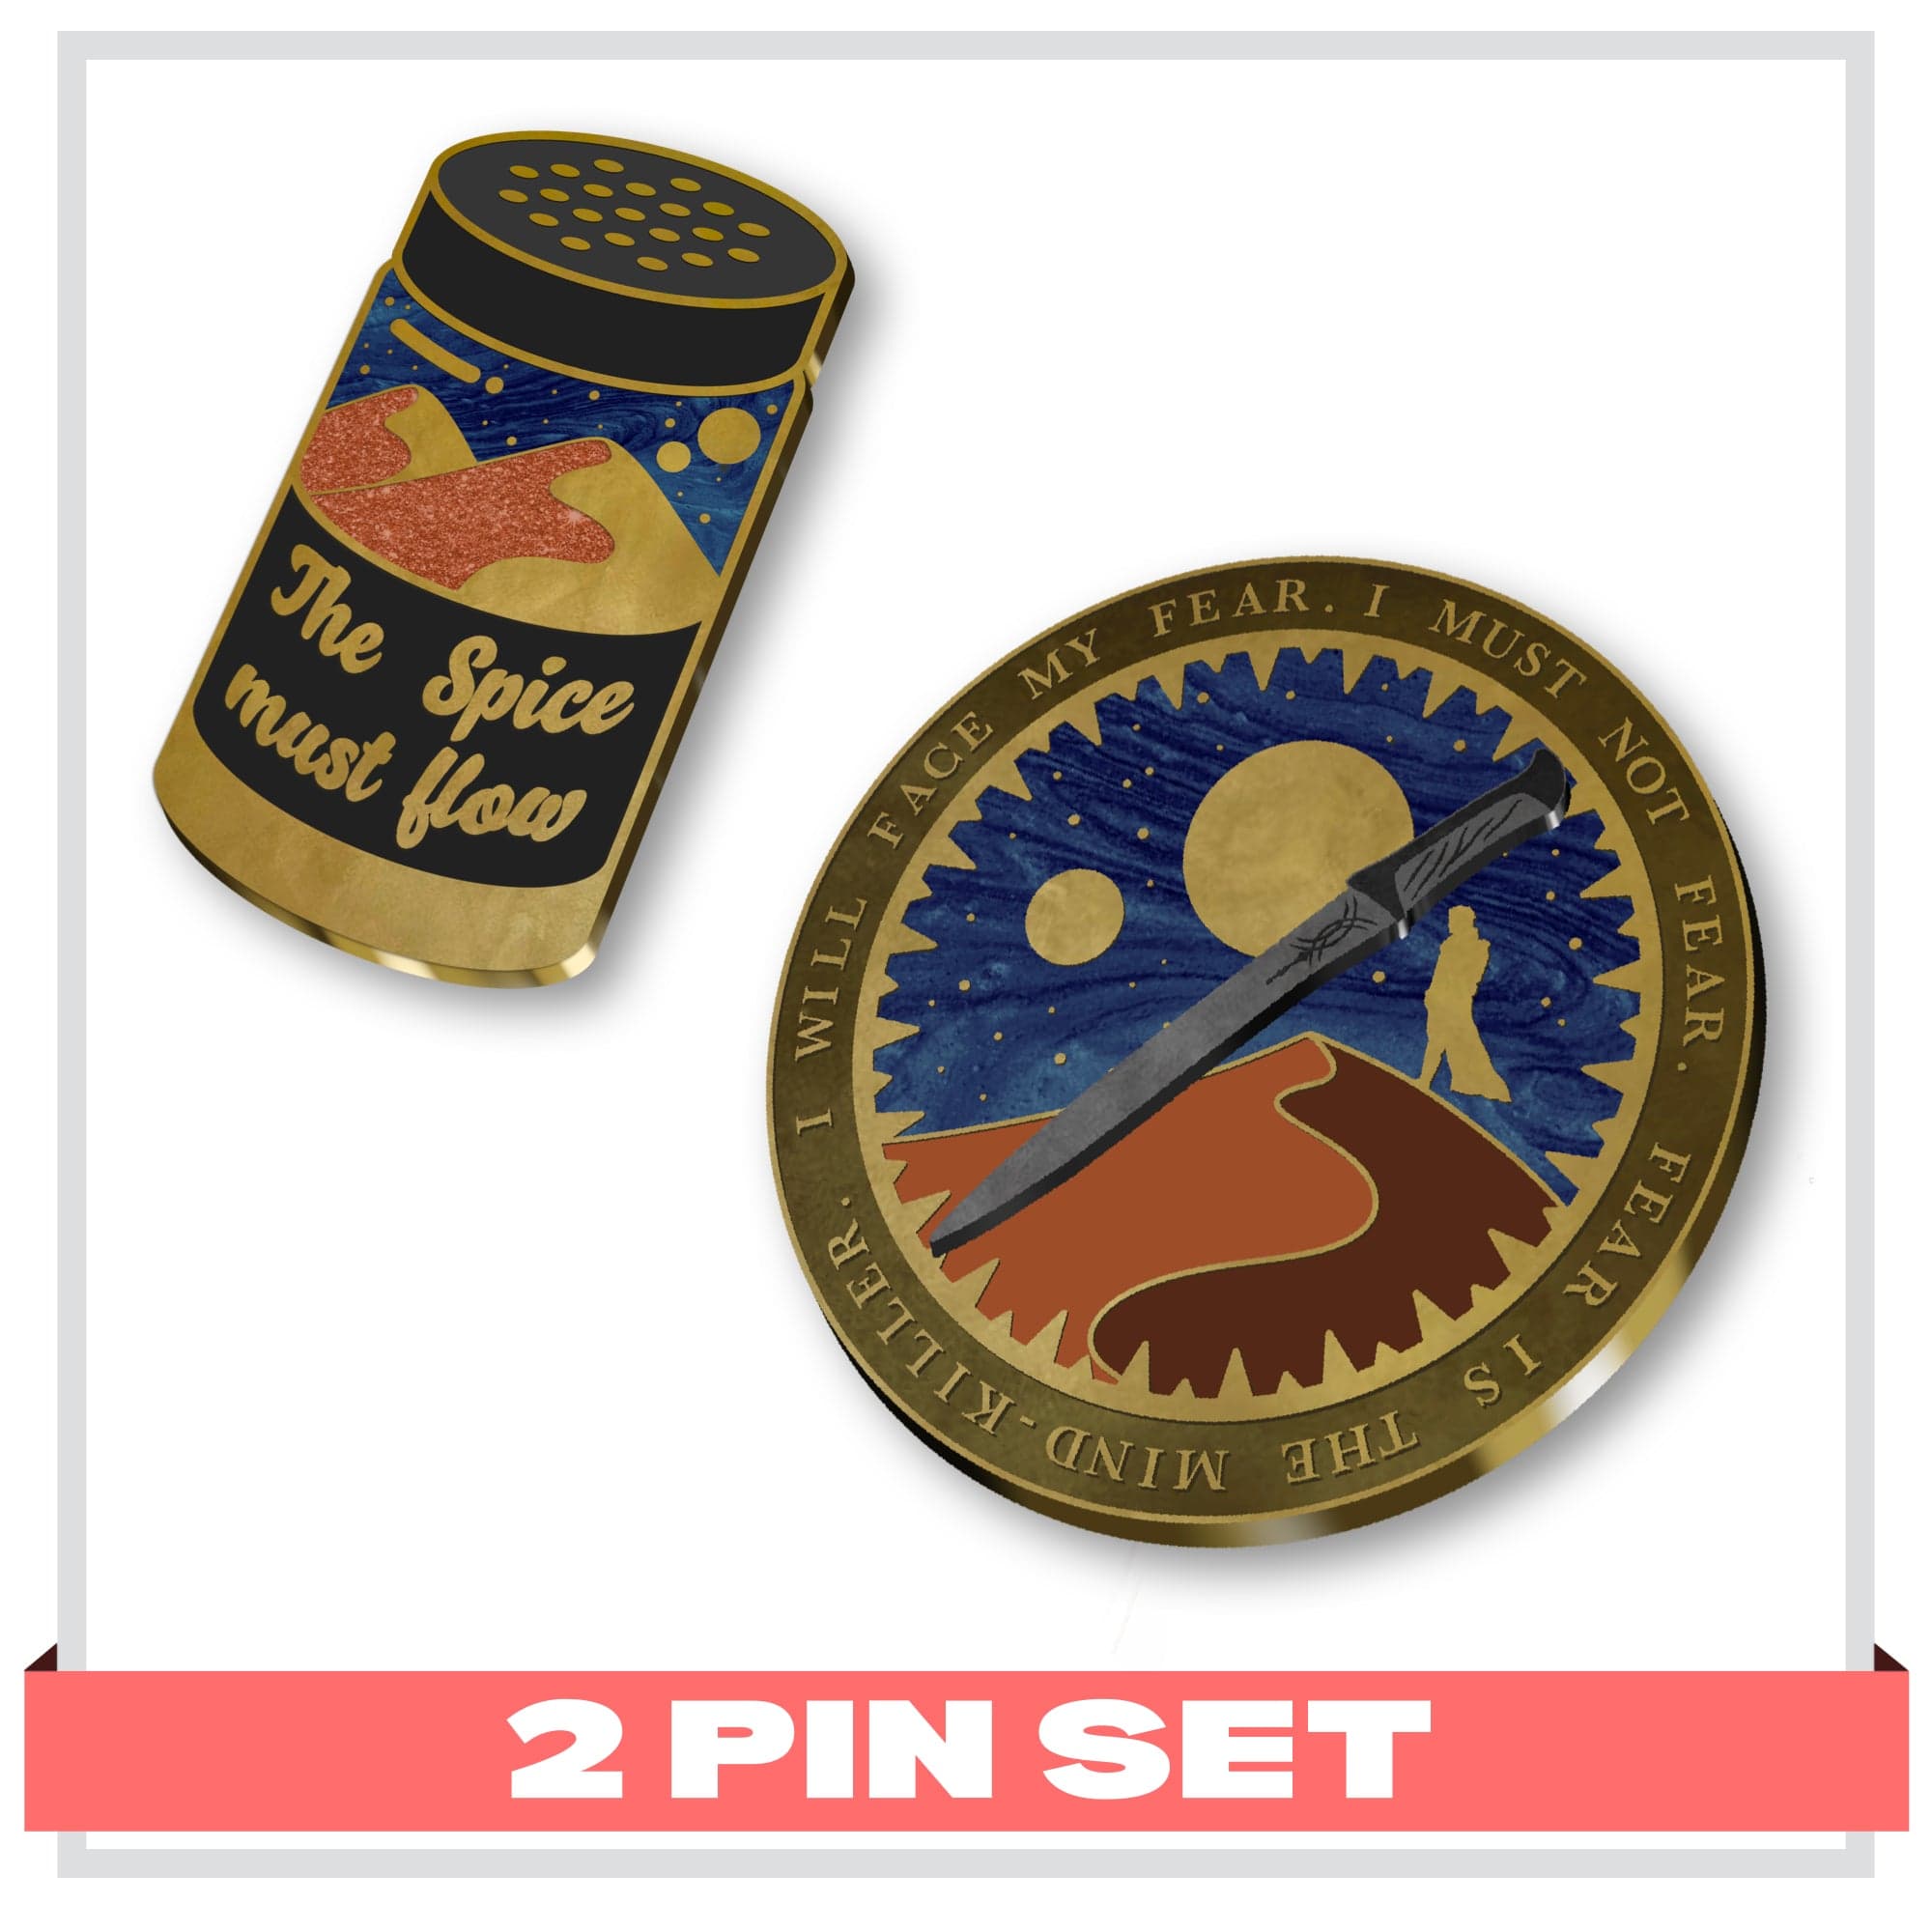 pinbuds Space Spice 2 pin set Dune Spice Quote Pin